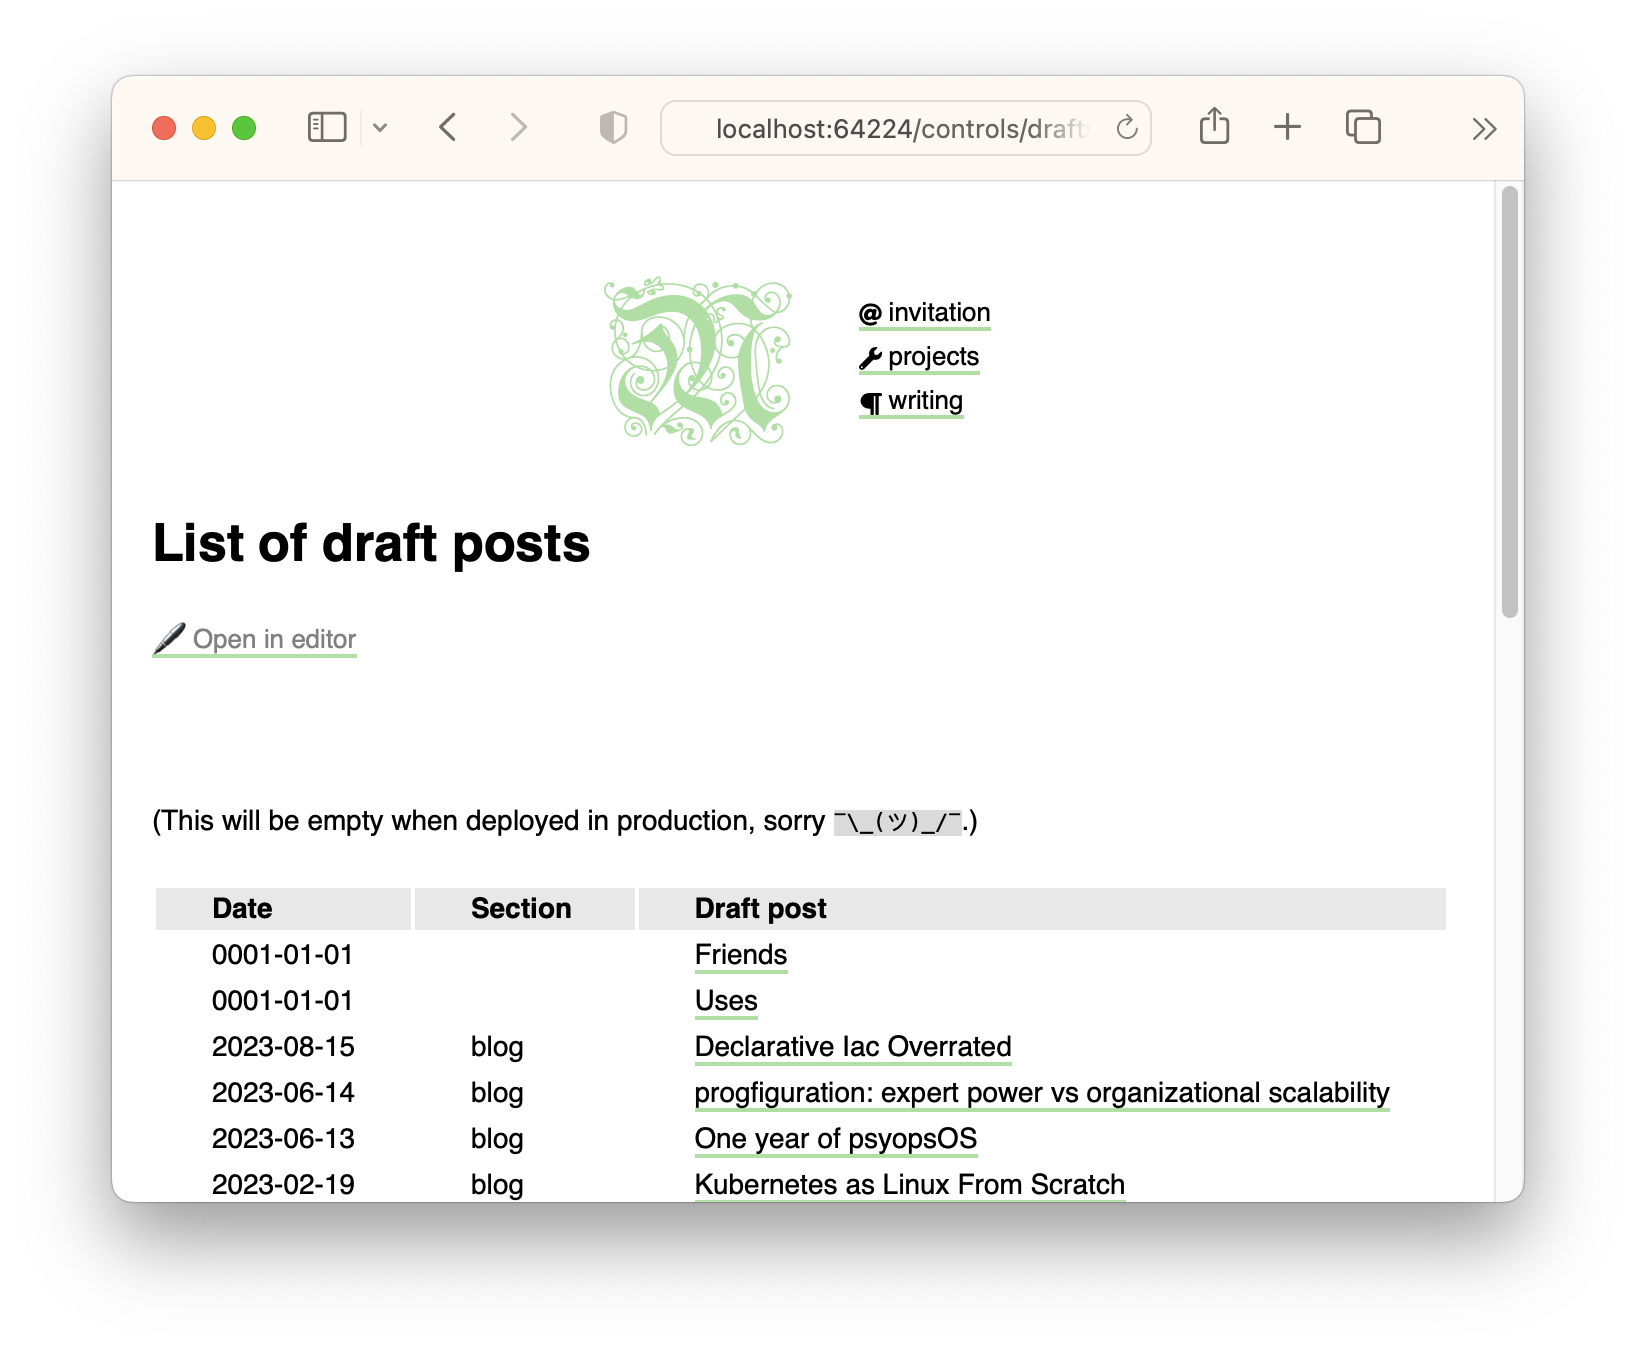 Screenshot of the /controls/drafts page